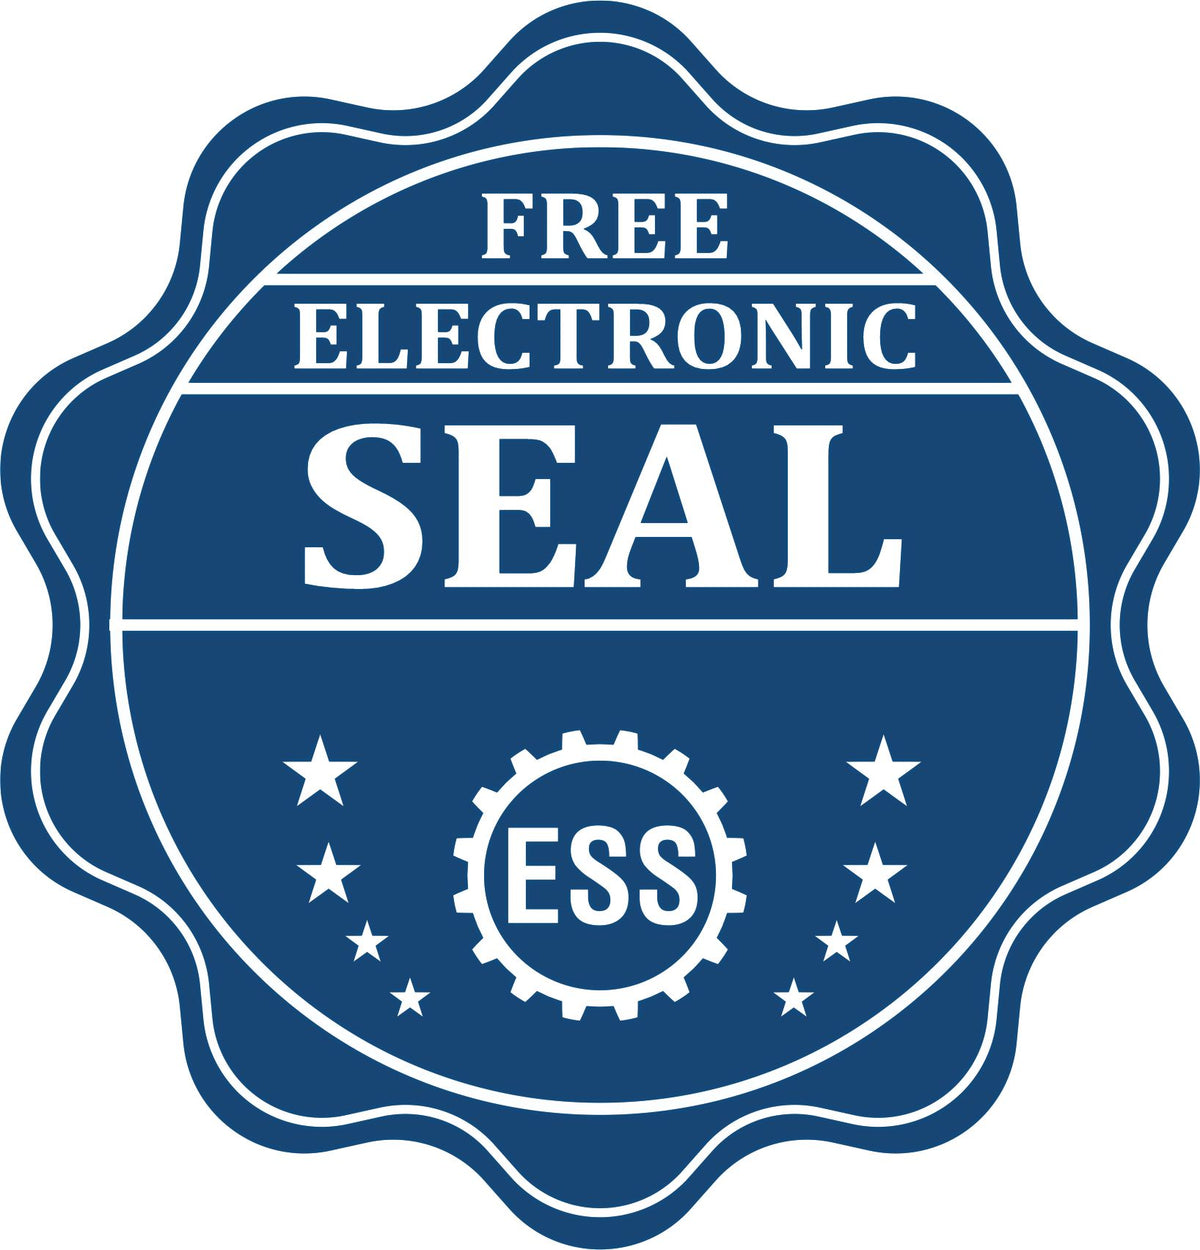 A badge showing a free electronic seal for the Nebraska Desk Architect Embossing Seal with stars and the ESS gear on the emblem.